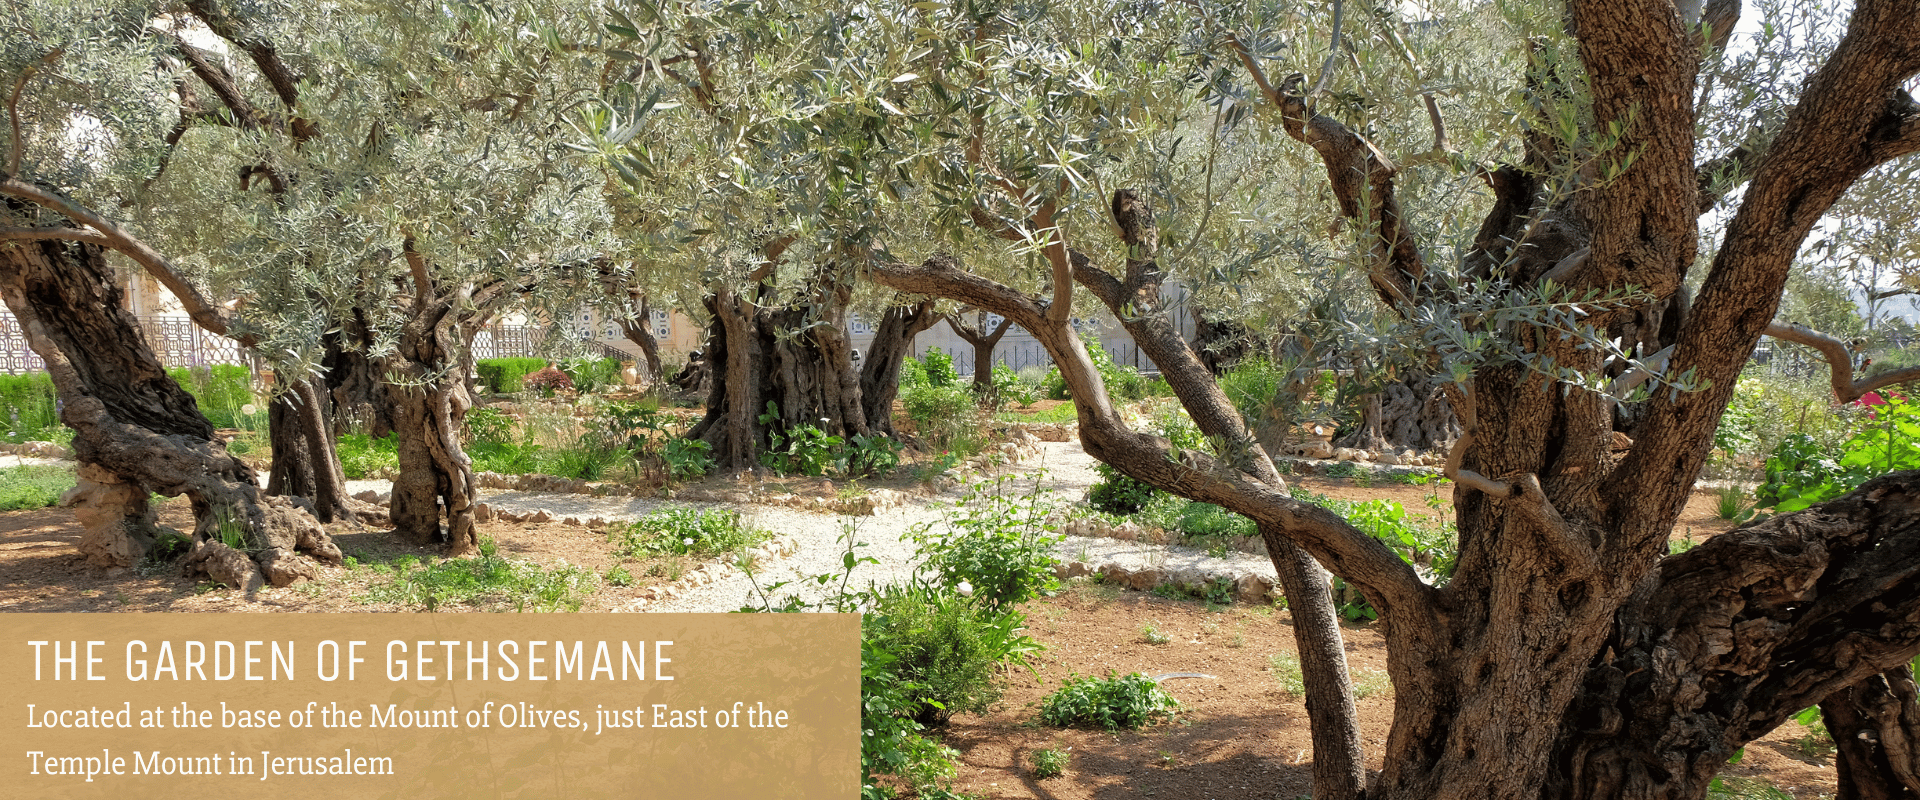 The Garden of Gethsemane - Place of Jesus Arrest - Located at the Base of the Mount of Olives just East of the Temple Mount in Jerusalem